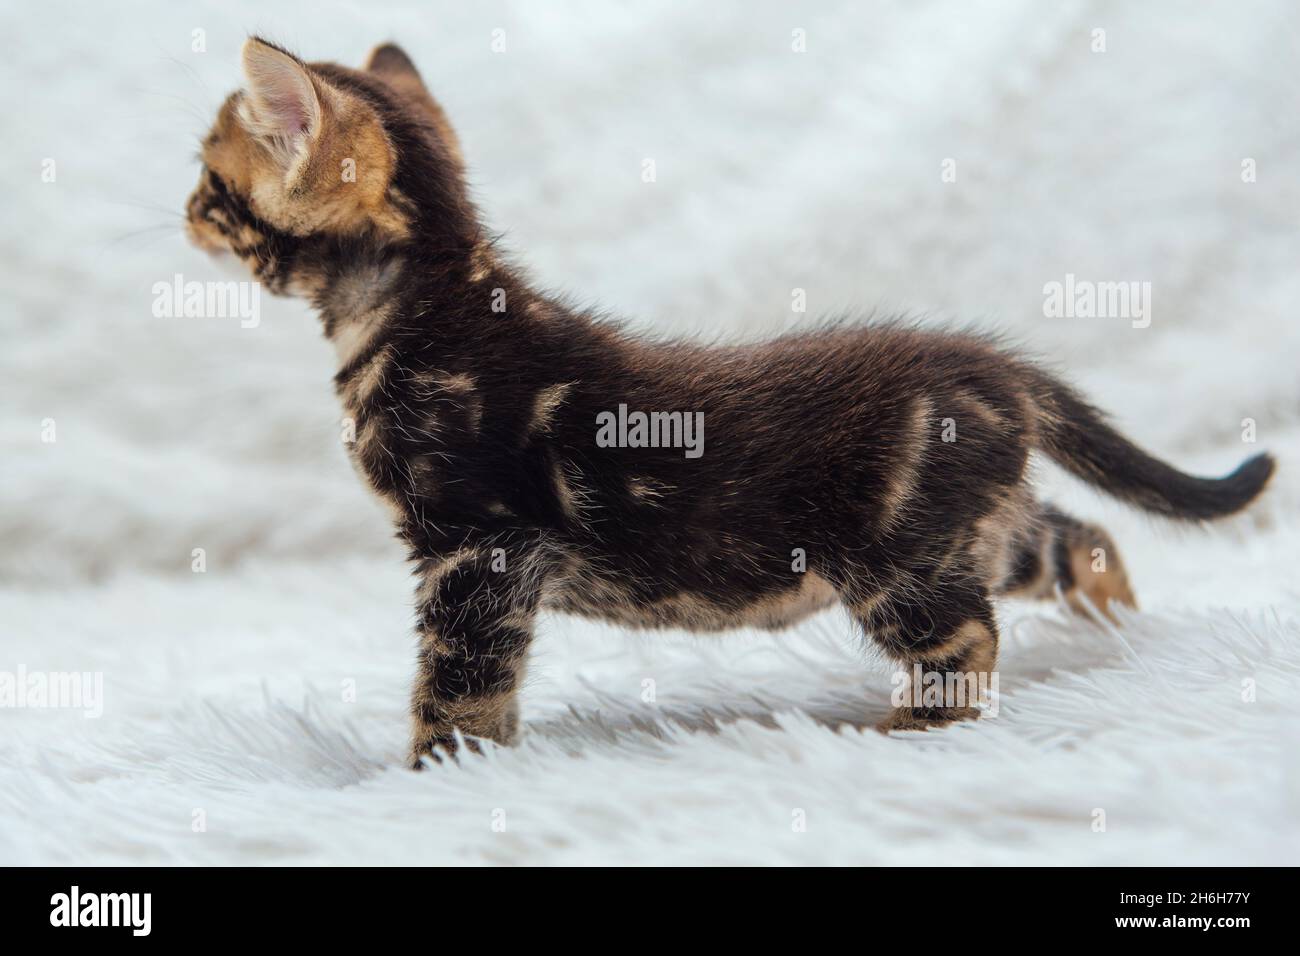 Cute one month old marble bengal kitten on the white fury blanket close-up. Stock Photo